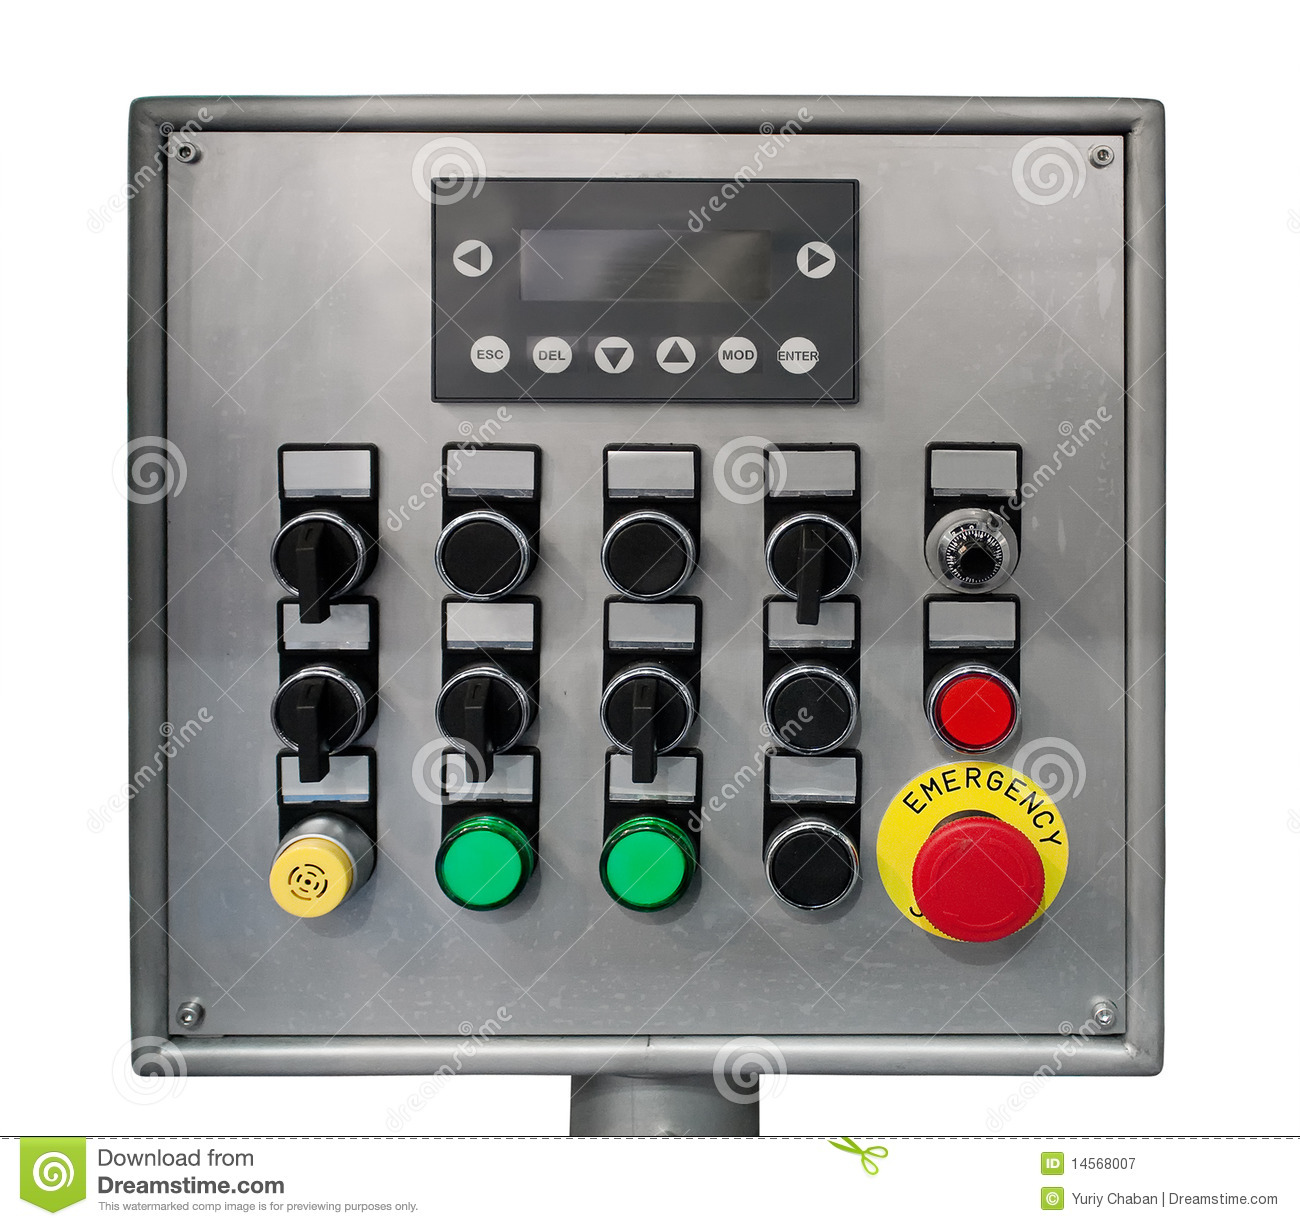 Modern Industrial Control Panel Royalty Free Stock Photography   Image    